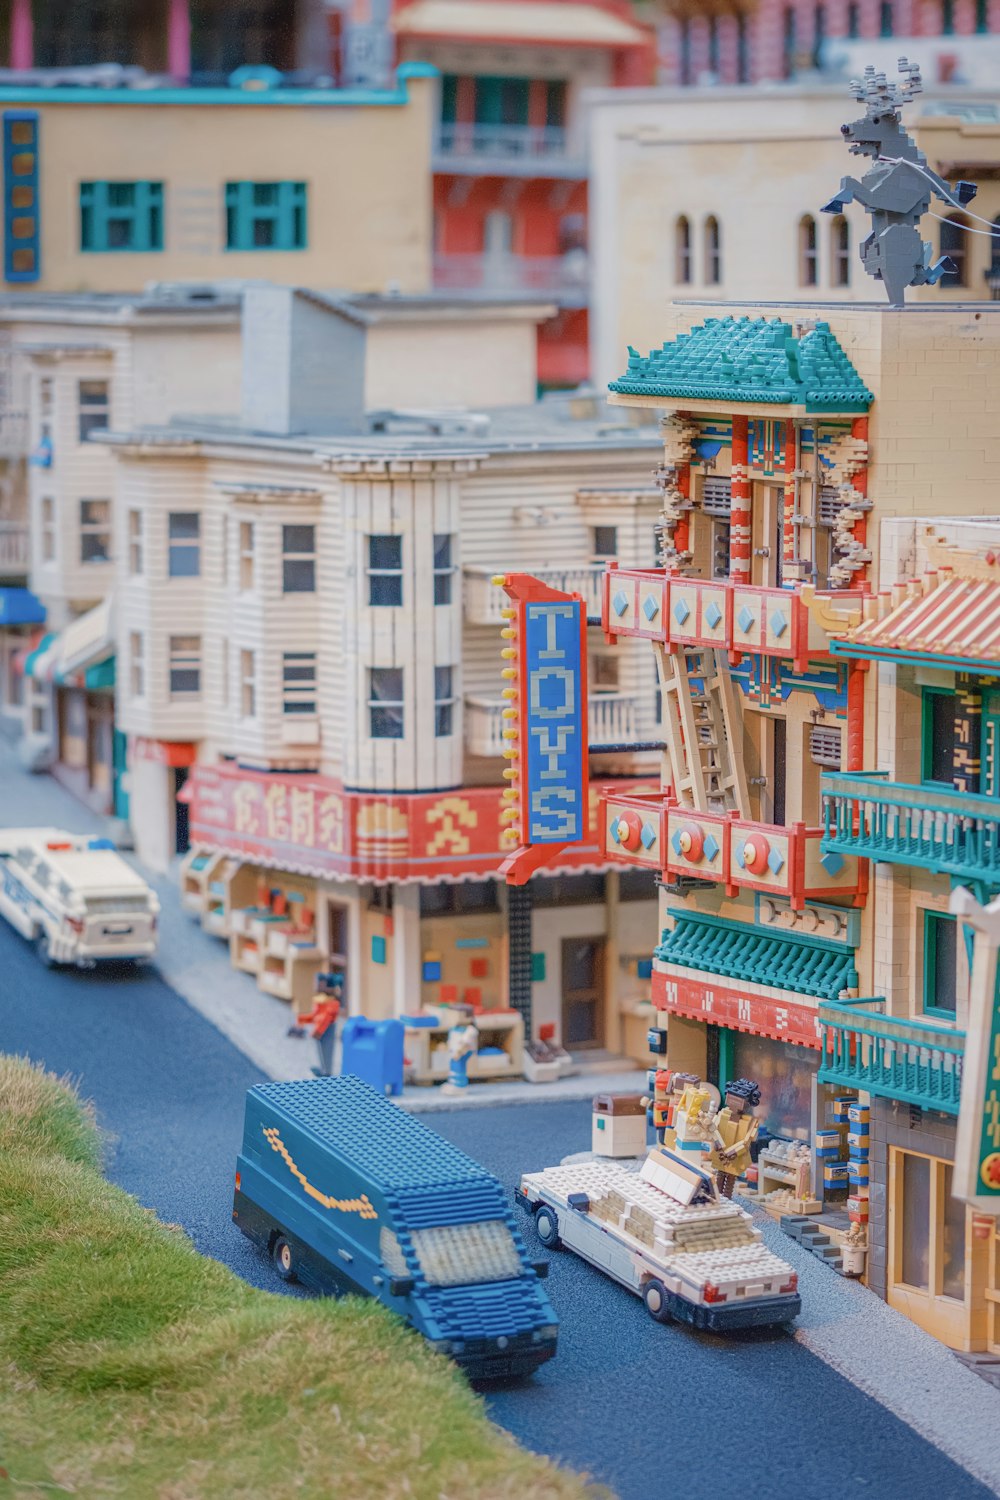 a model of a city with cars and buildings